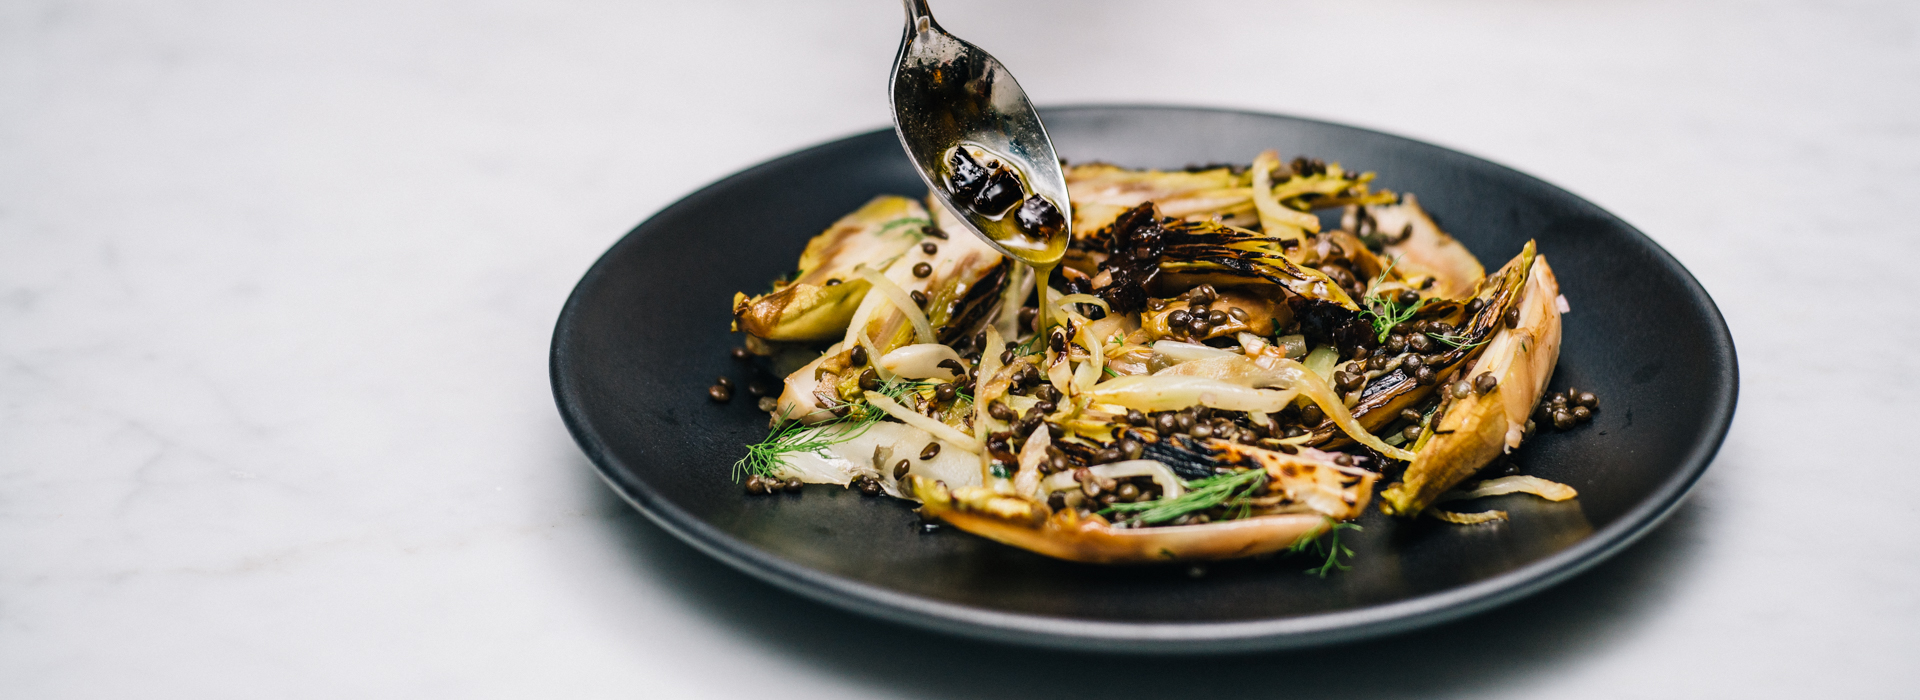 <p>Charring endive and fennel gives texture and flavor to a healthy winter lentil salad while dried prunes add sweetness to counter the sharp edge of the shallot vinaigrette.</p>
